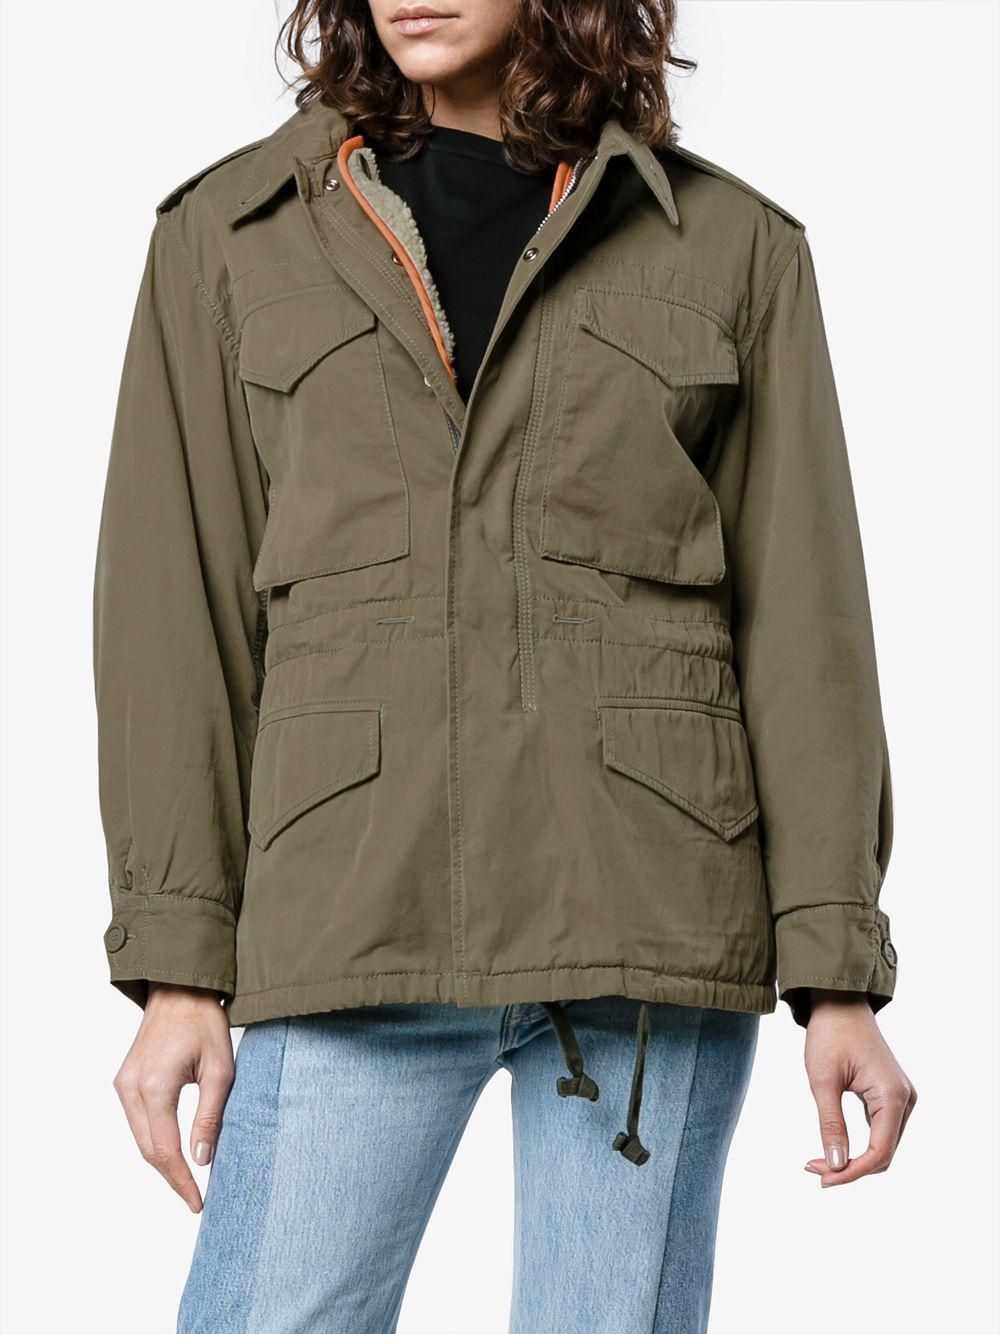 Gucci Cotton Logo Print Military Jacket in Green - Lyst